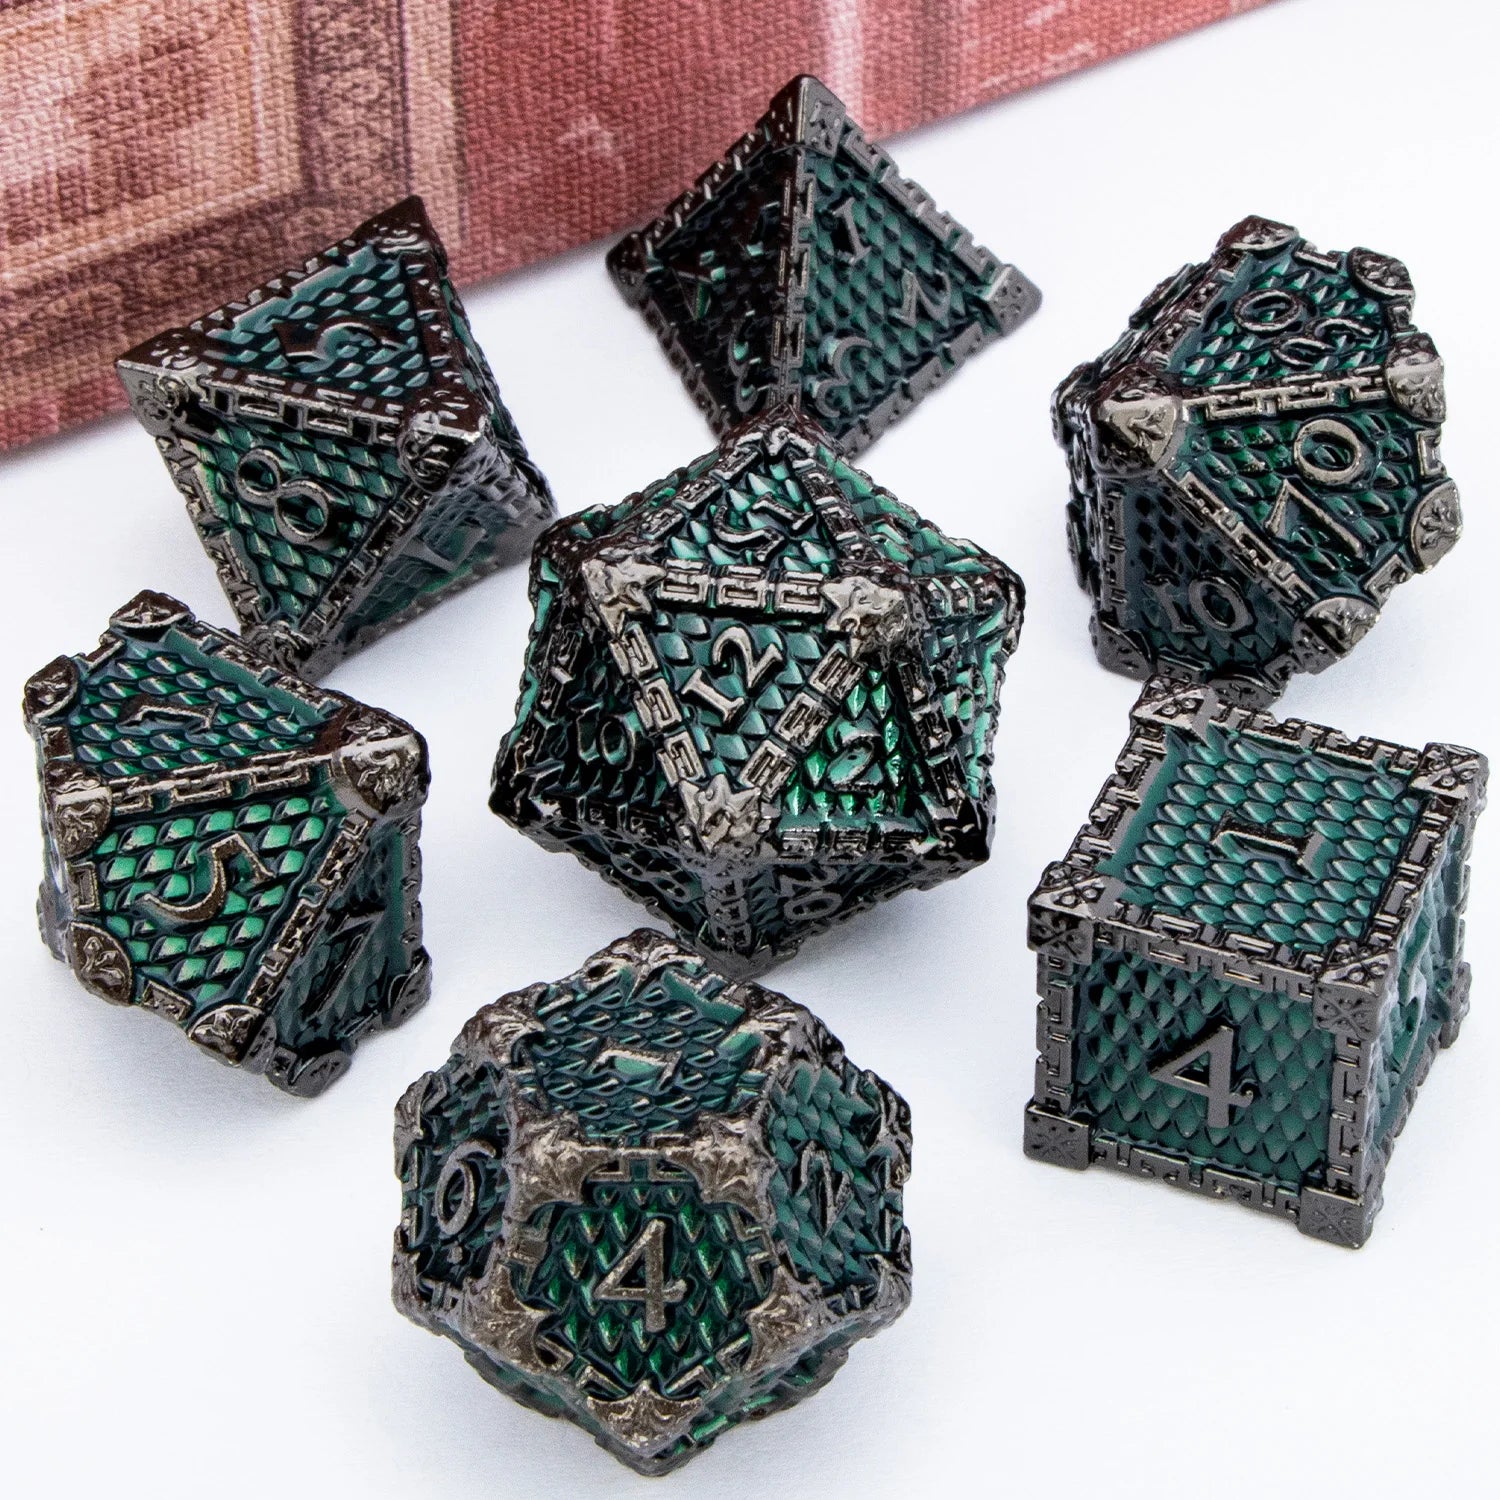 DND Metal Dice Set Dragon Scale Blood D&D Dice Dungeon and Dragon Role Playing Games Polyhedral Dice RPG D and D Dice Black Green